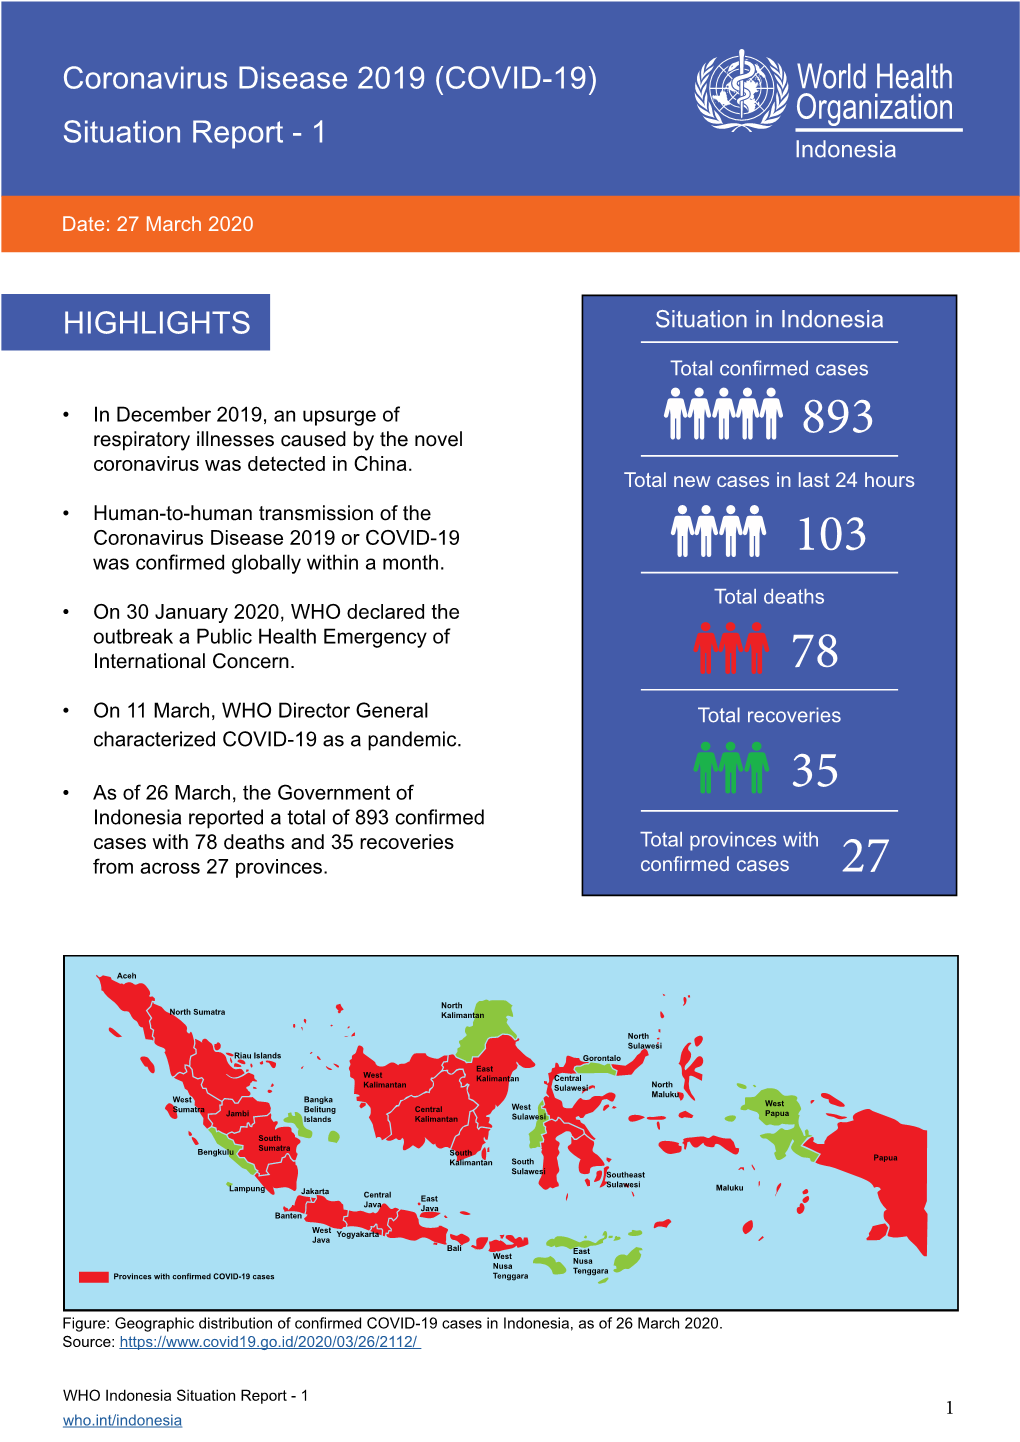 Who-Indonesia-Situation-Report-1.Pdf